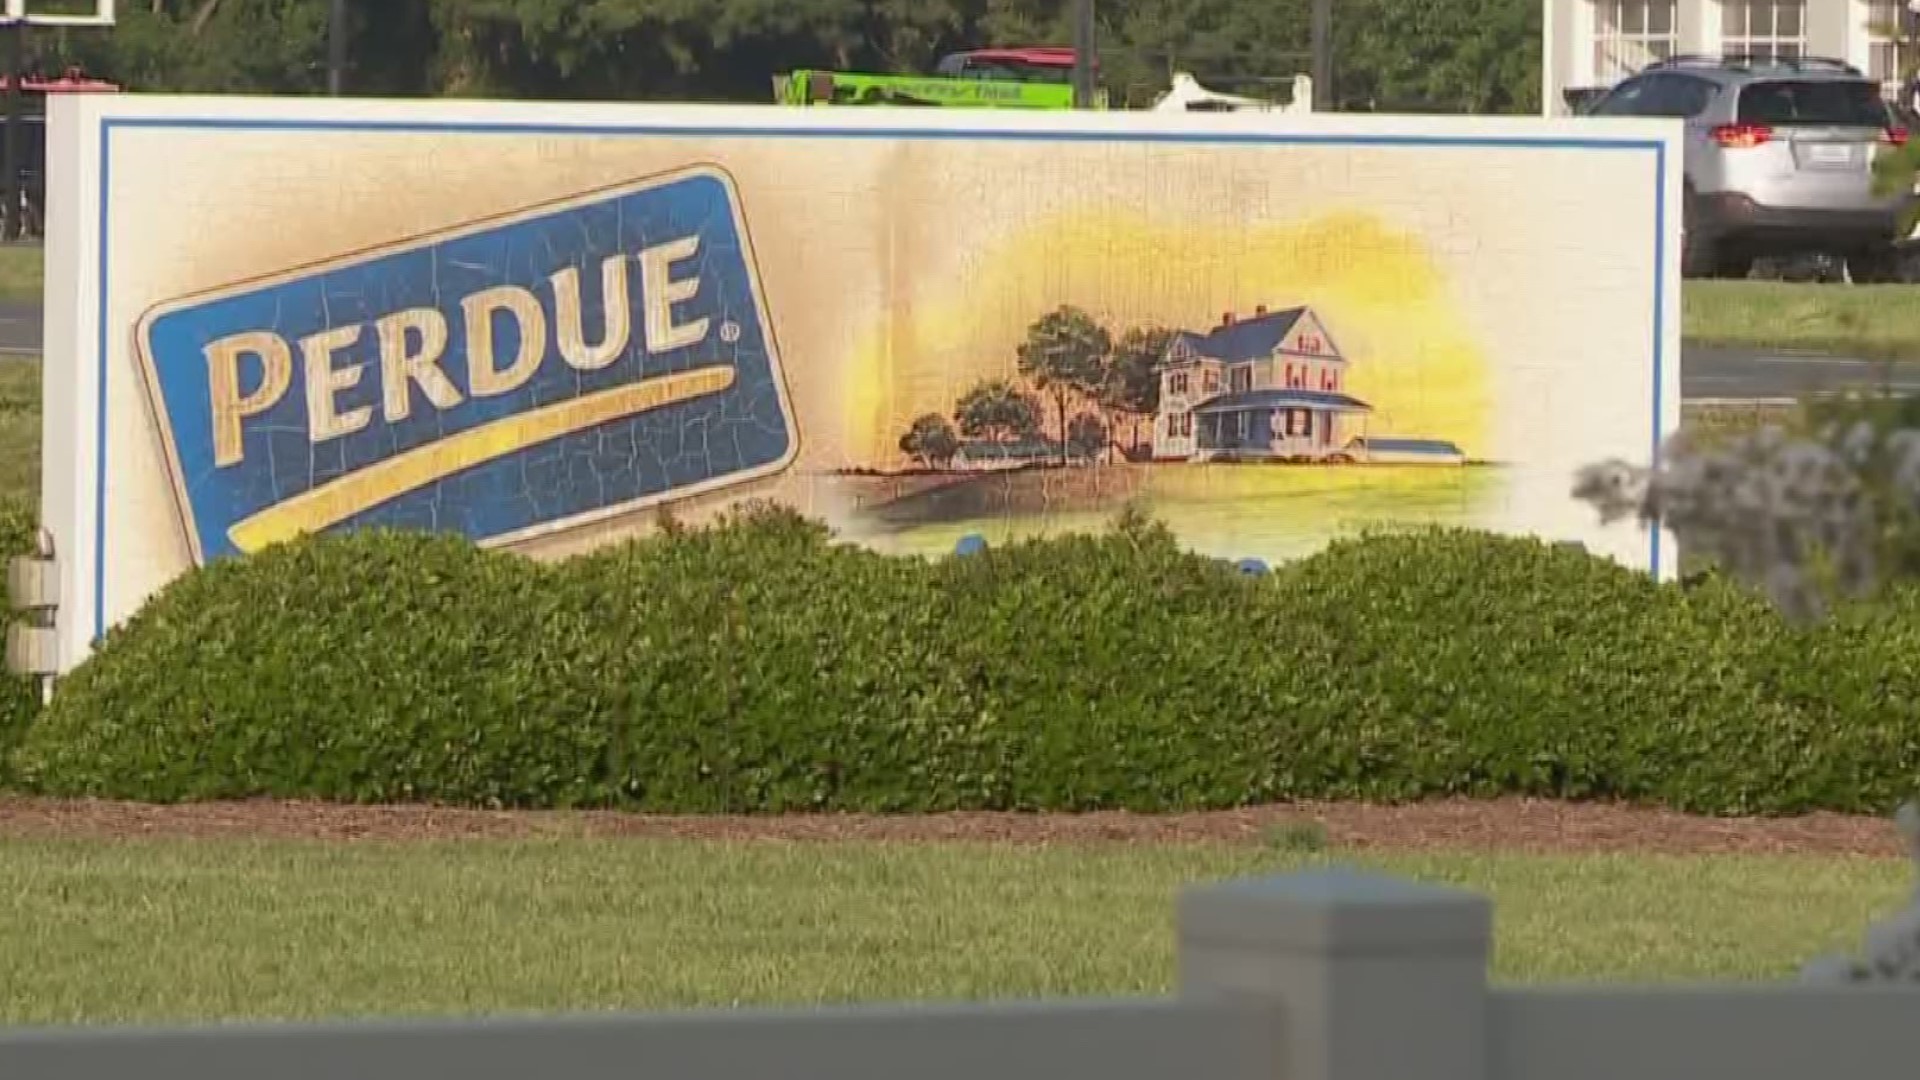 A contractor company has been accused of illegally hiring children to clean the Perdue Farms plant on the Eastern Shore during the overnight hours.